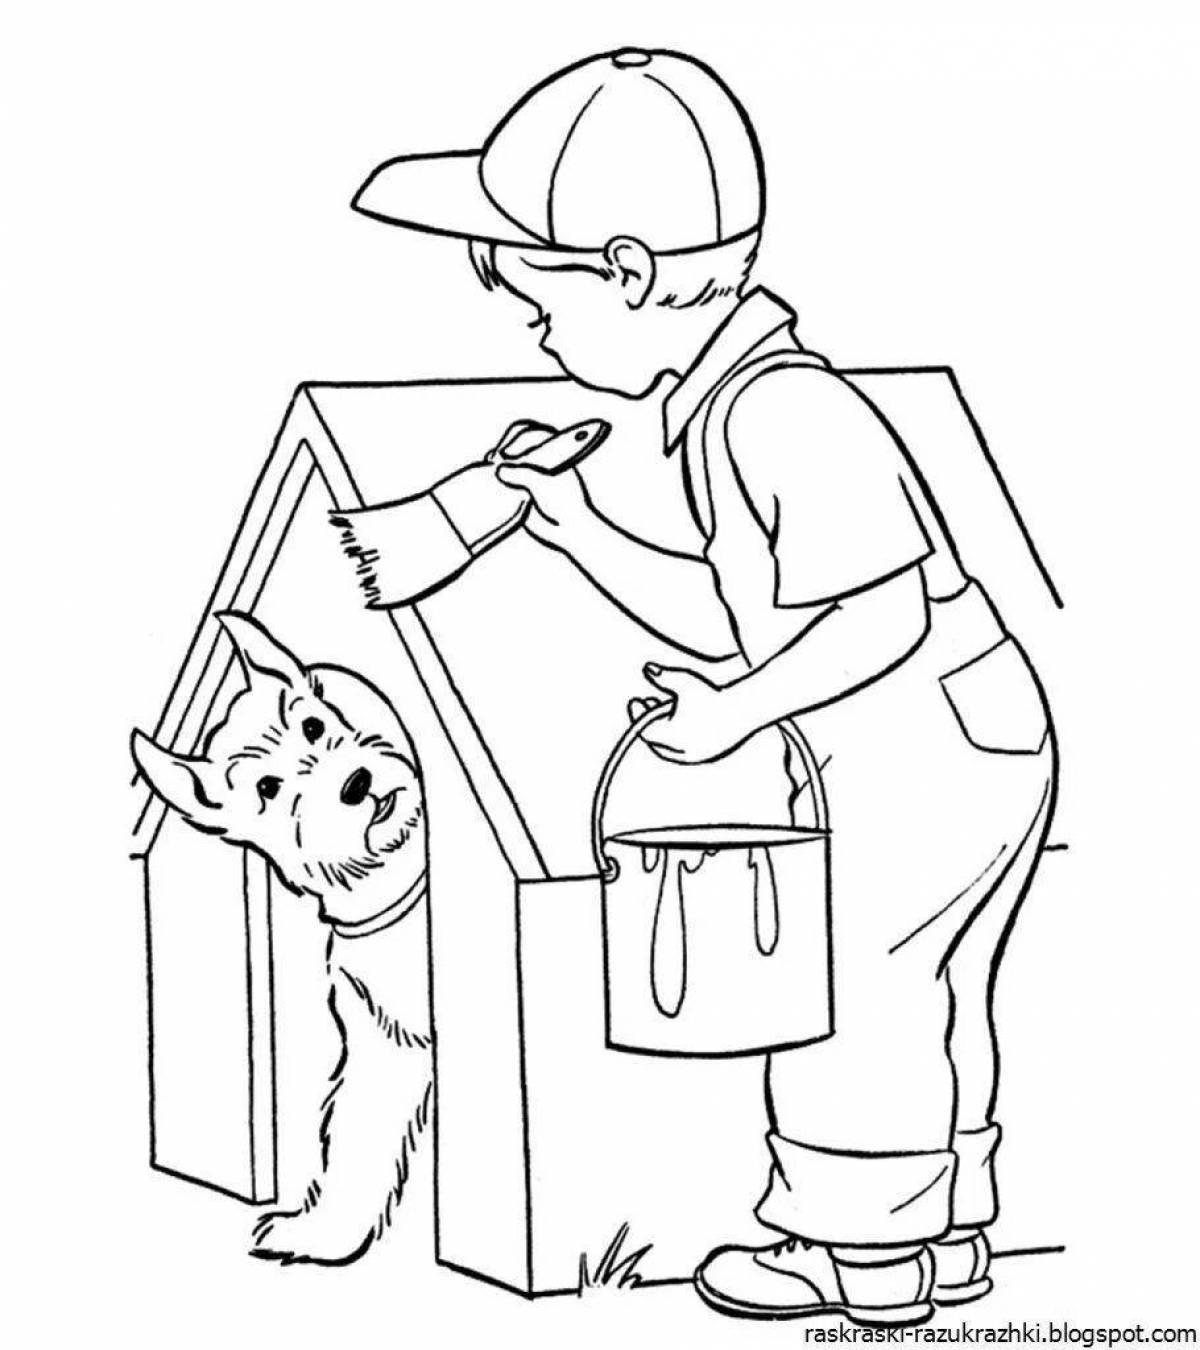 Awesome good deeds coloring page